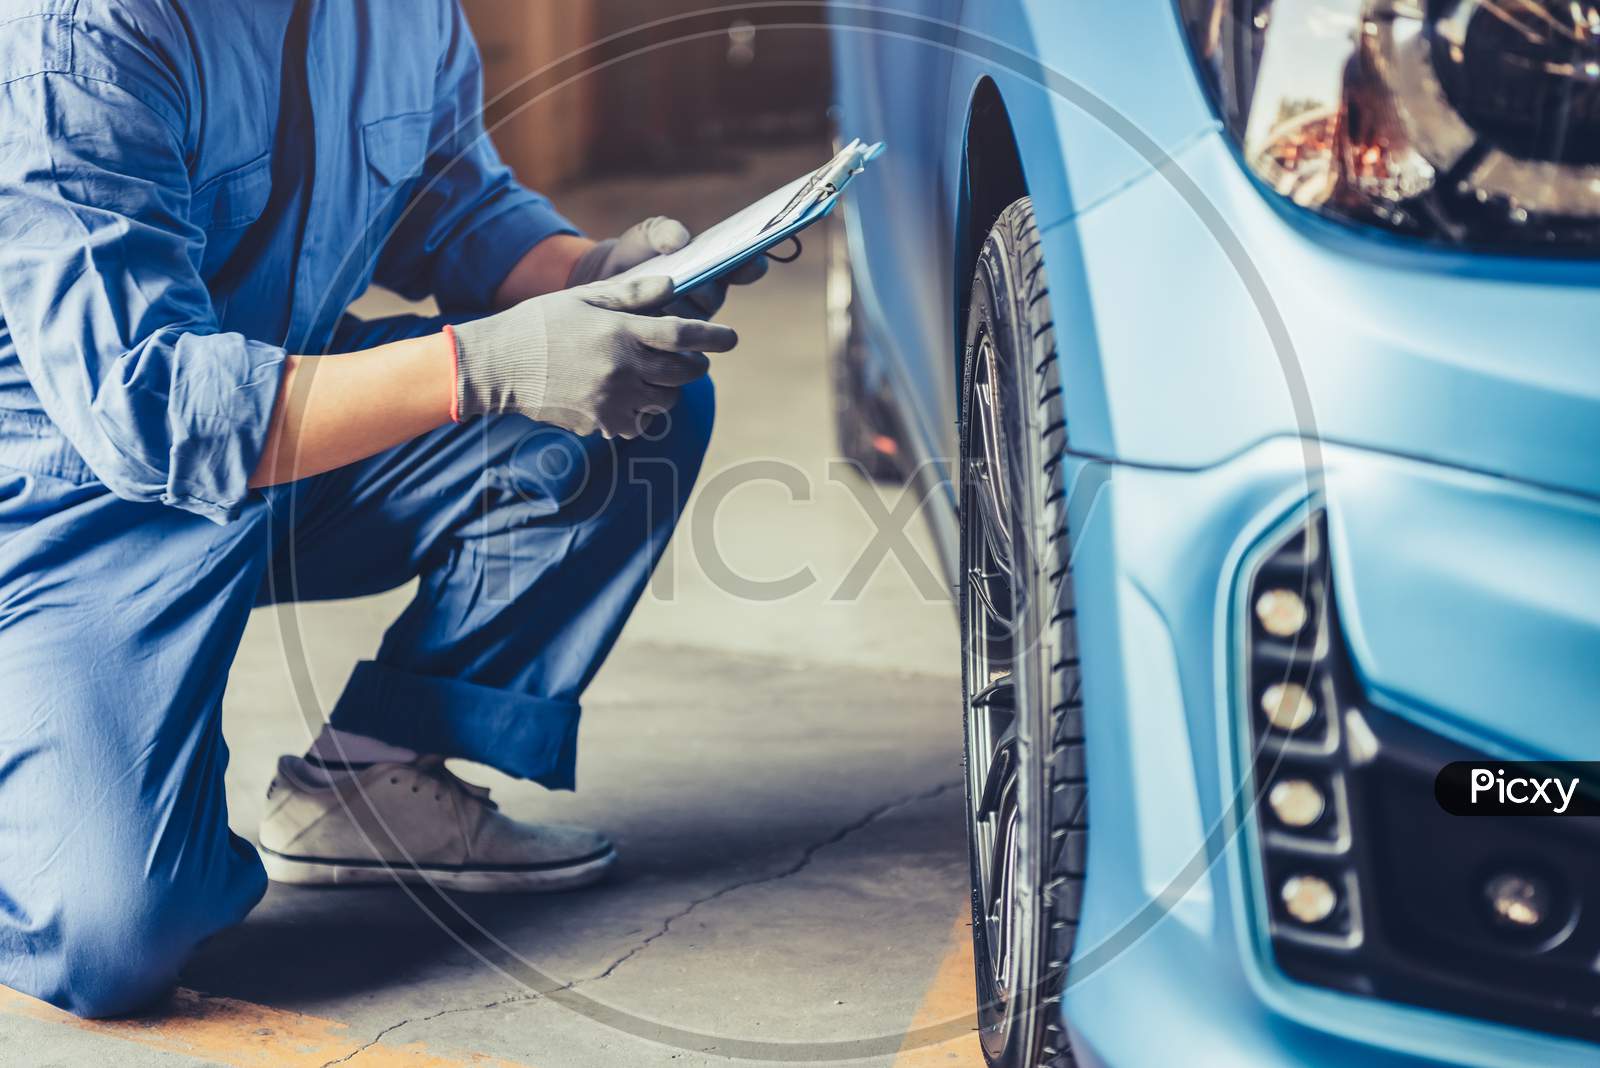 Asian Car Mechanic Technician Holding Clipboard And Checking To Maintenance Vehicle By Customer Claim Order In Auto Repair Shop Garage. Wheel Tire Repair Service. People Occupation And Business Job